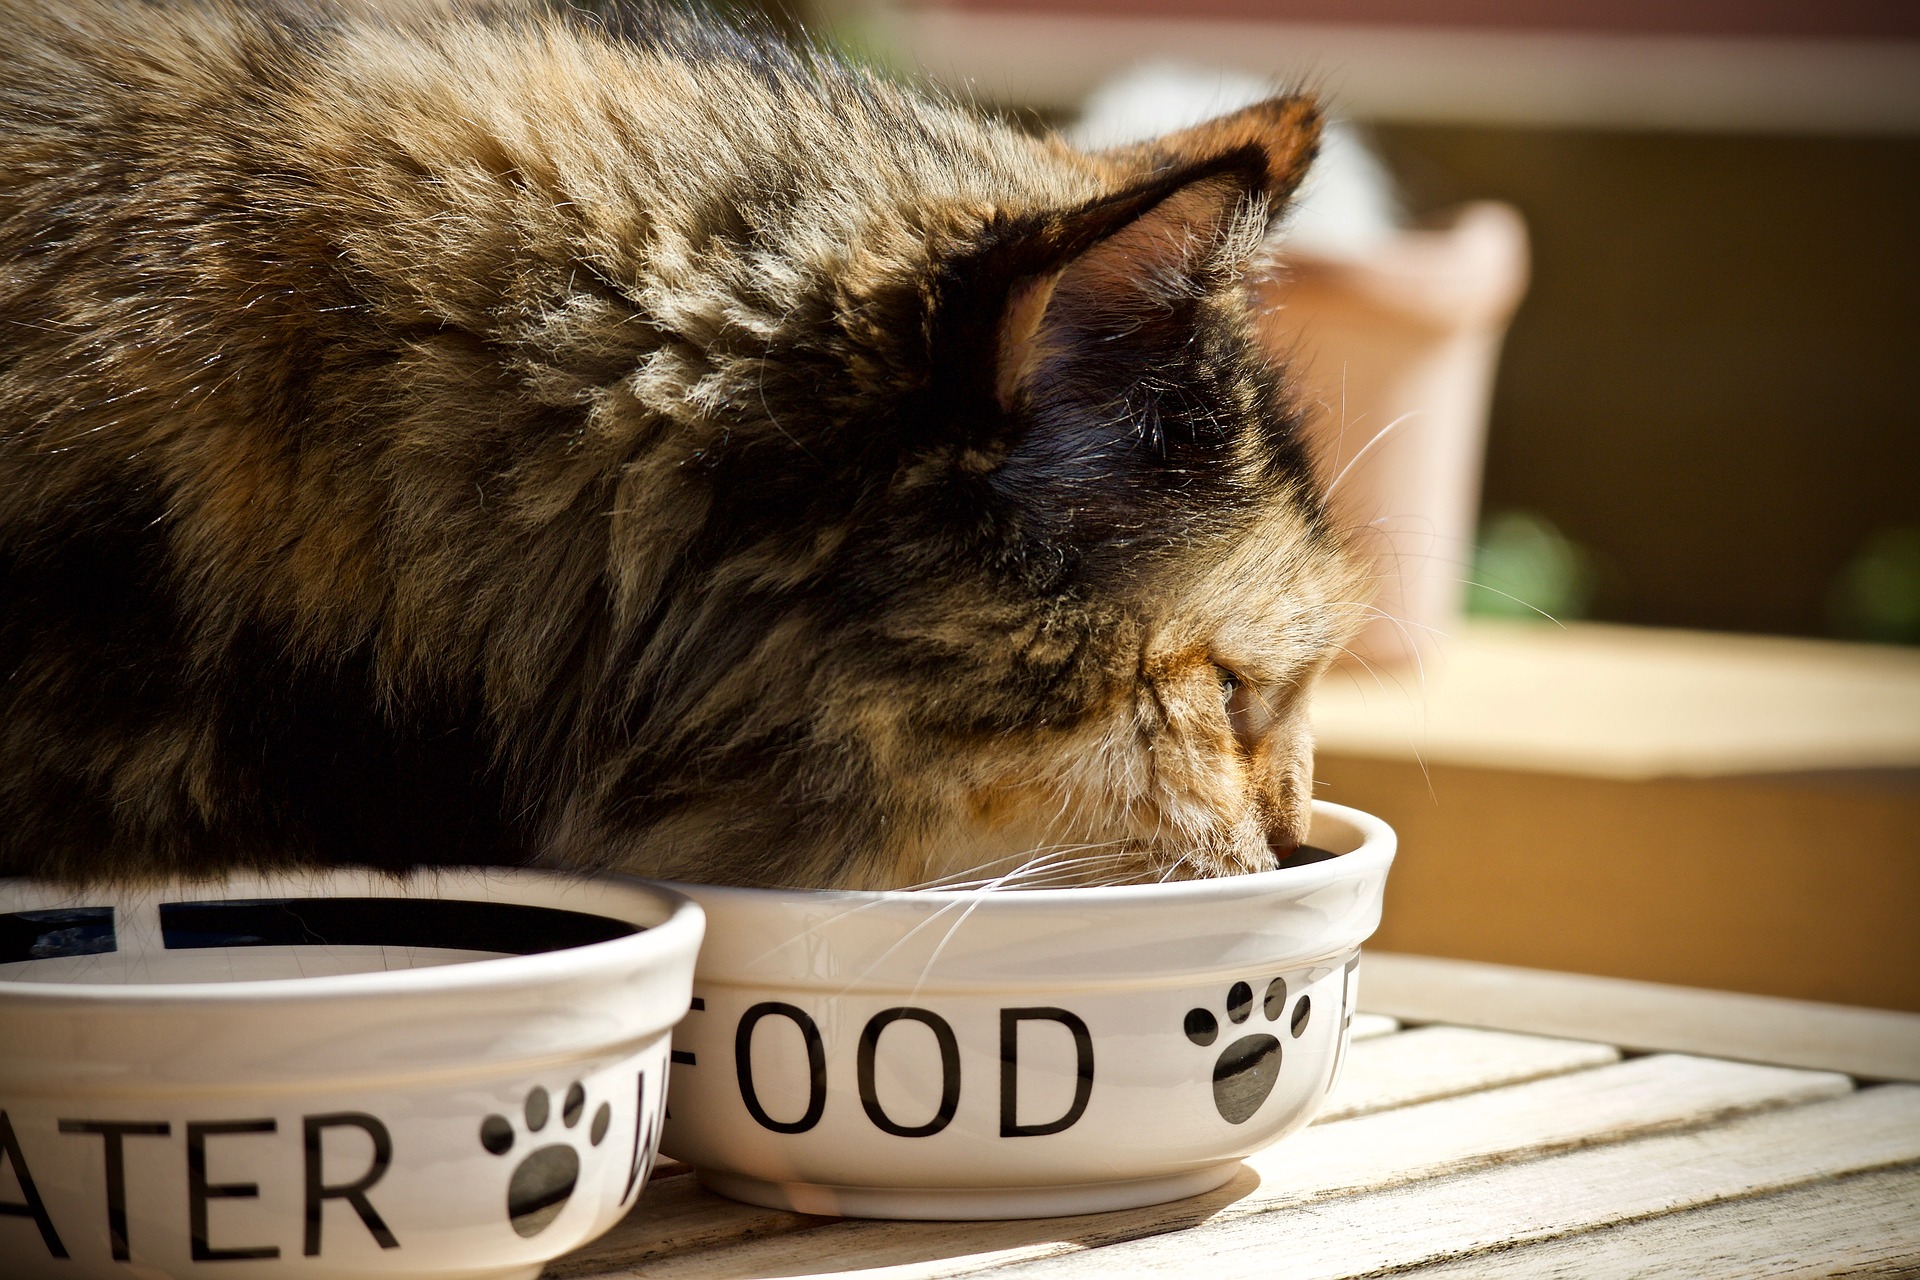 A cat eating out of a food dish